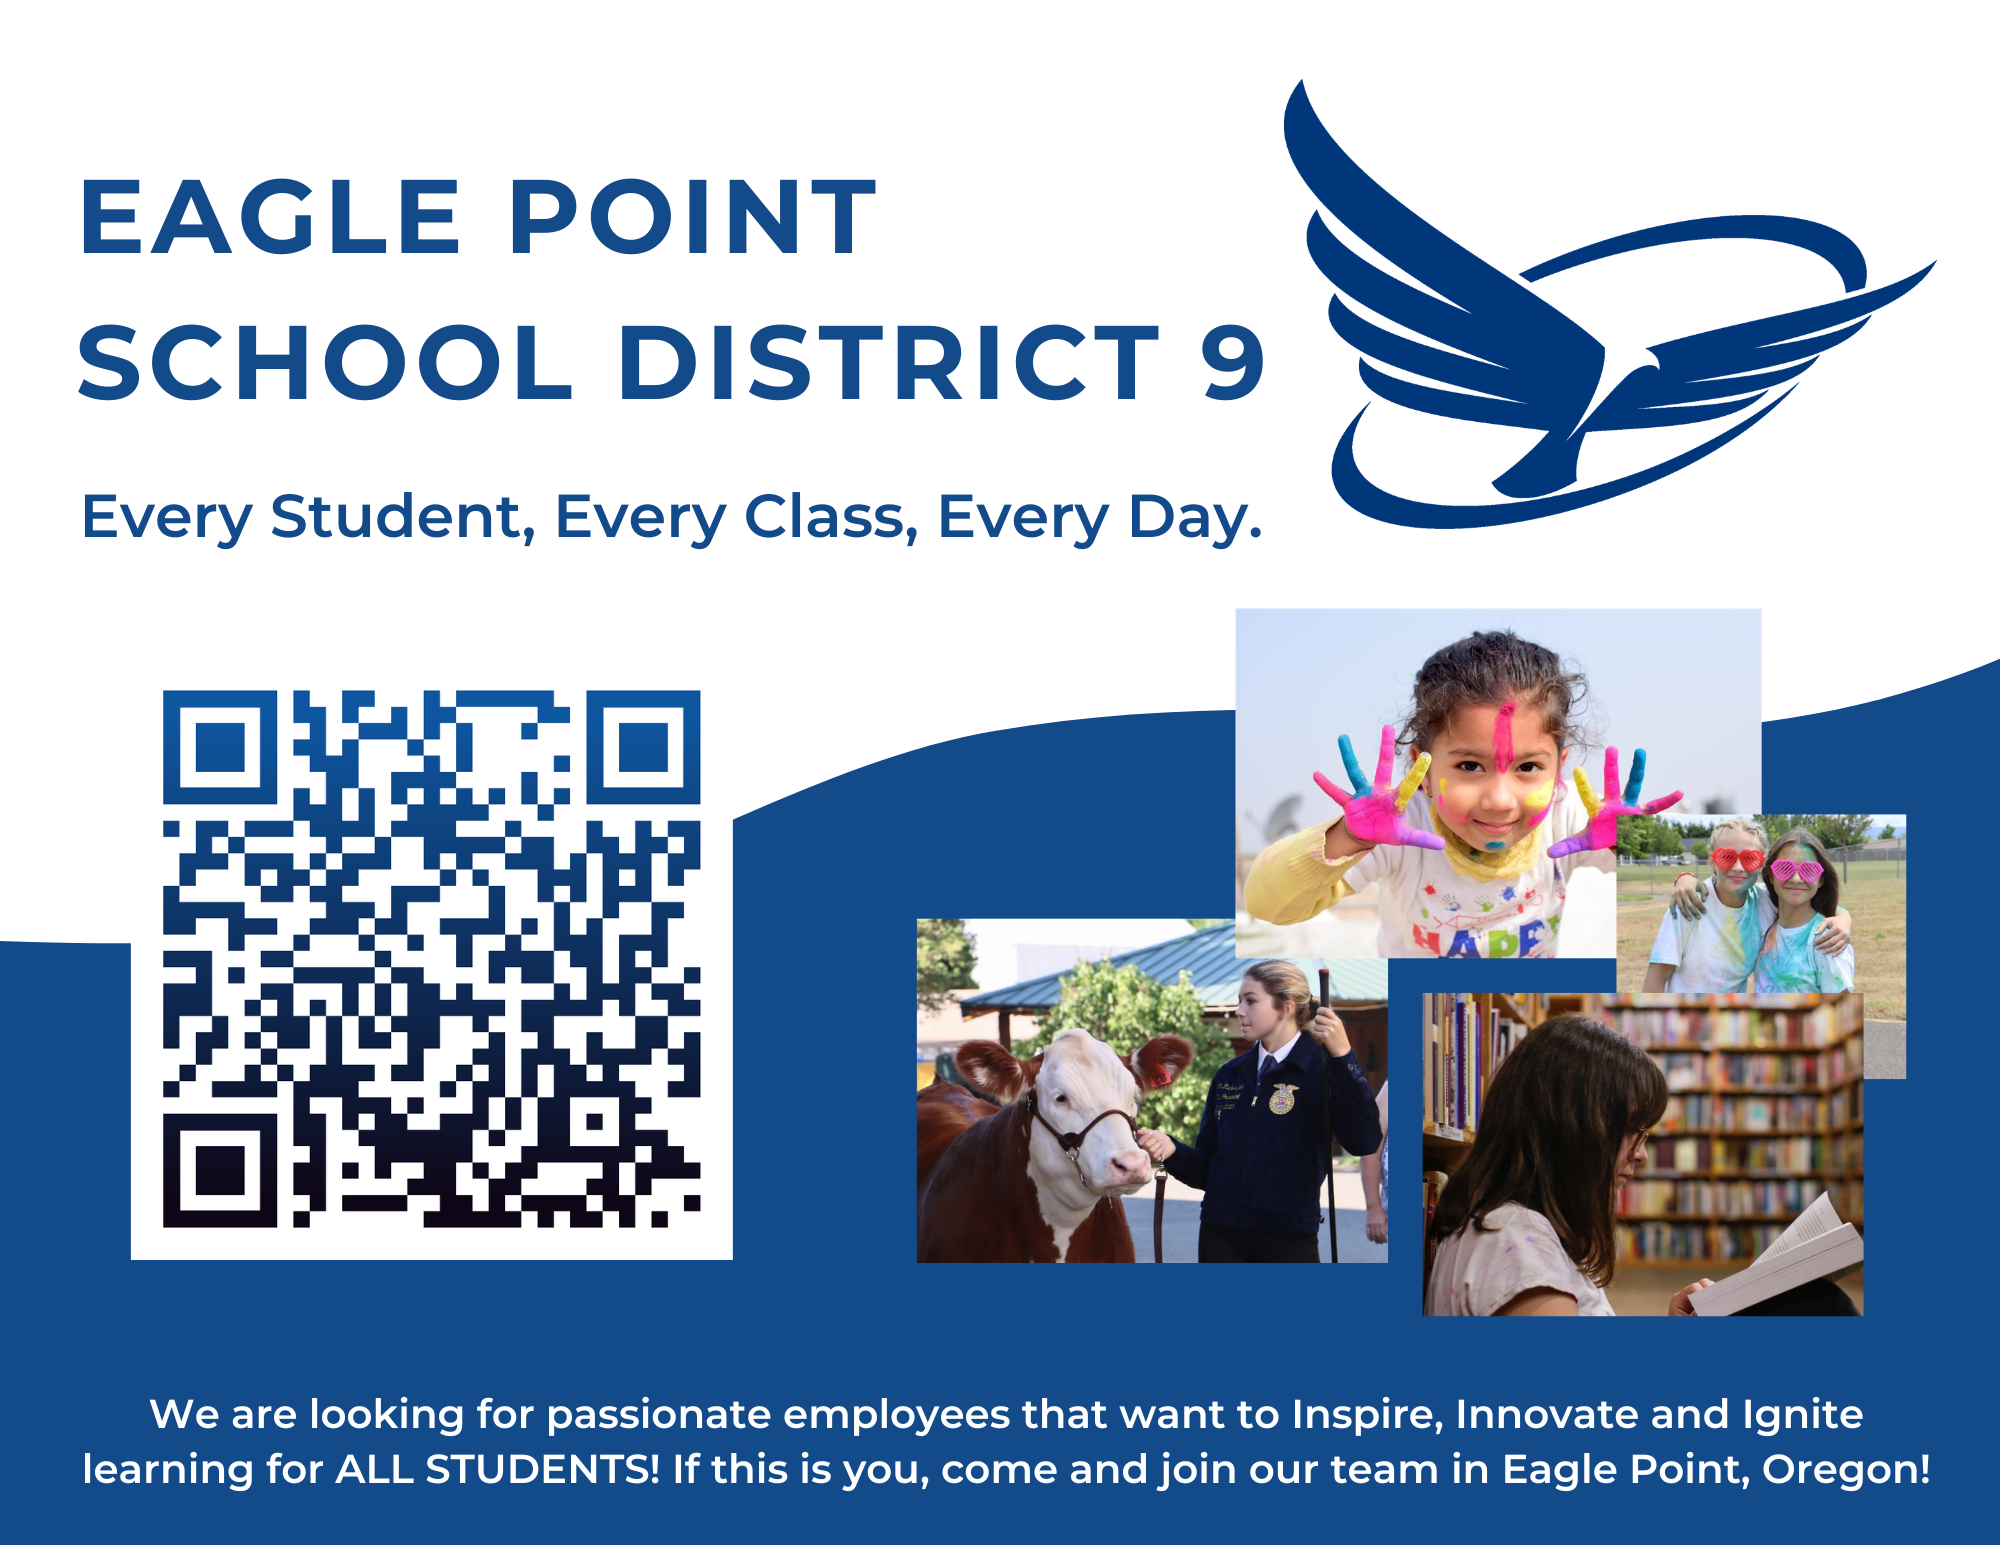 We are looking for passionate employees that want to Inspire, Innovate and Ignite learning for ALL STUDENTS! If this is you, come and join our team in Eagle Point, Oregon!